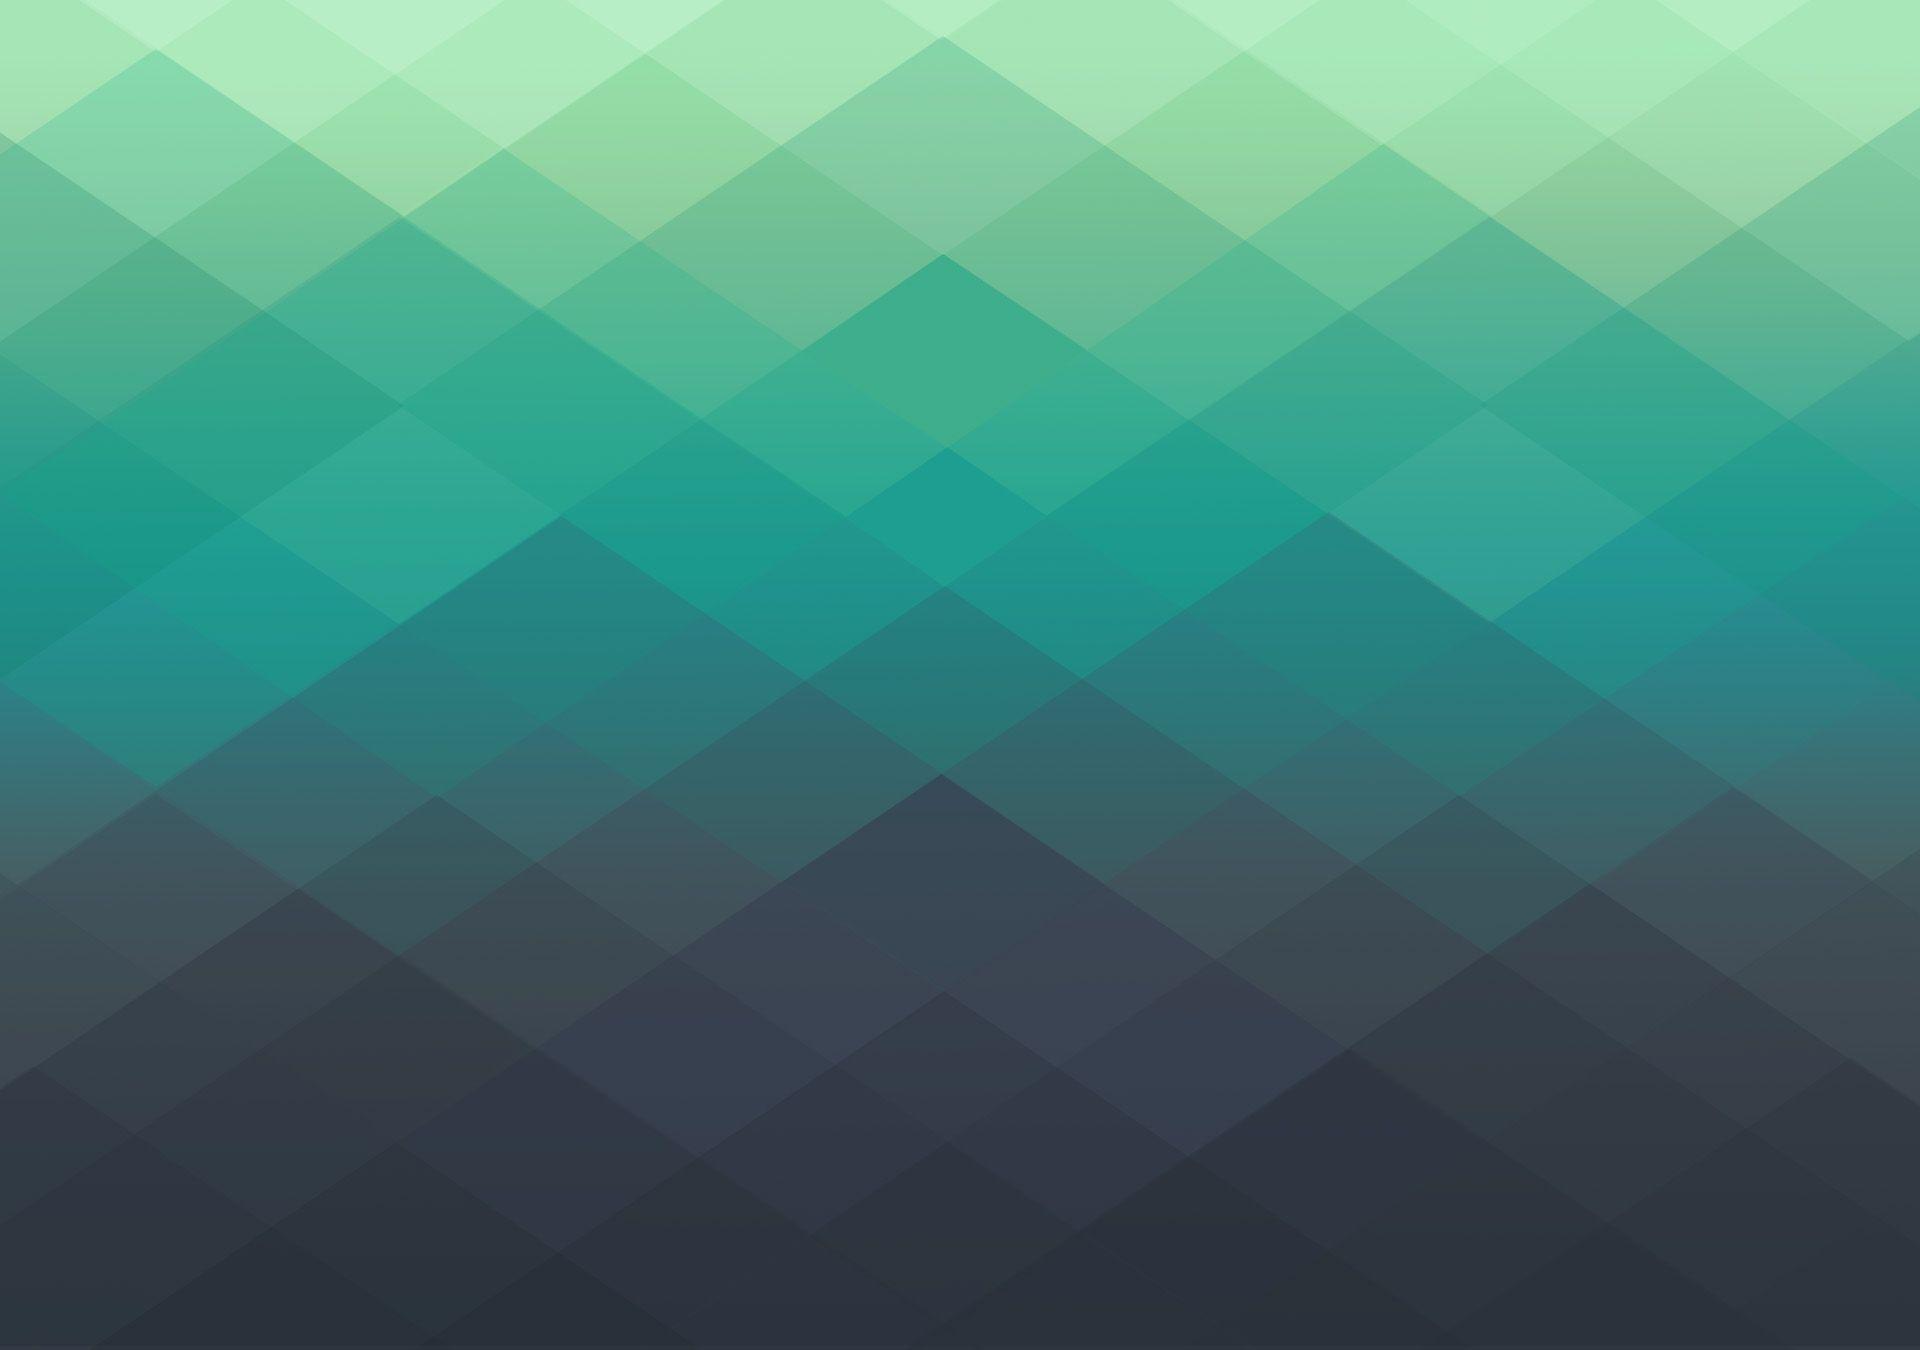 900+ Geometric Background Images: Download HD Backgrounds on Unsplash